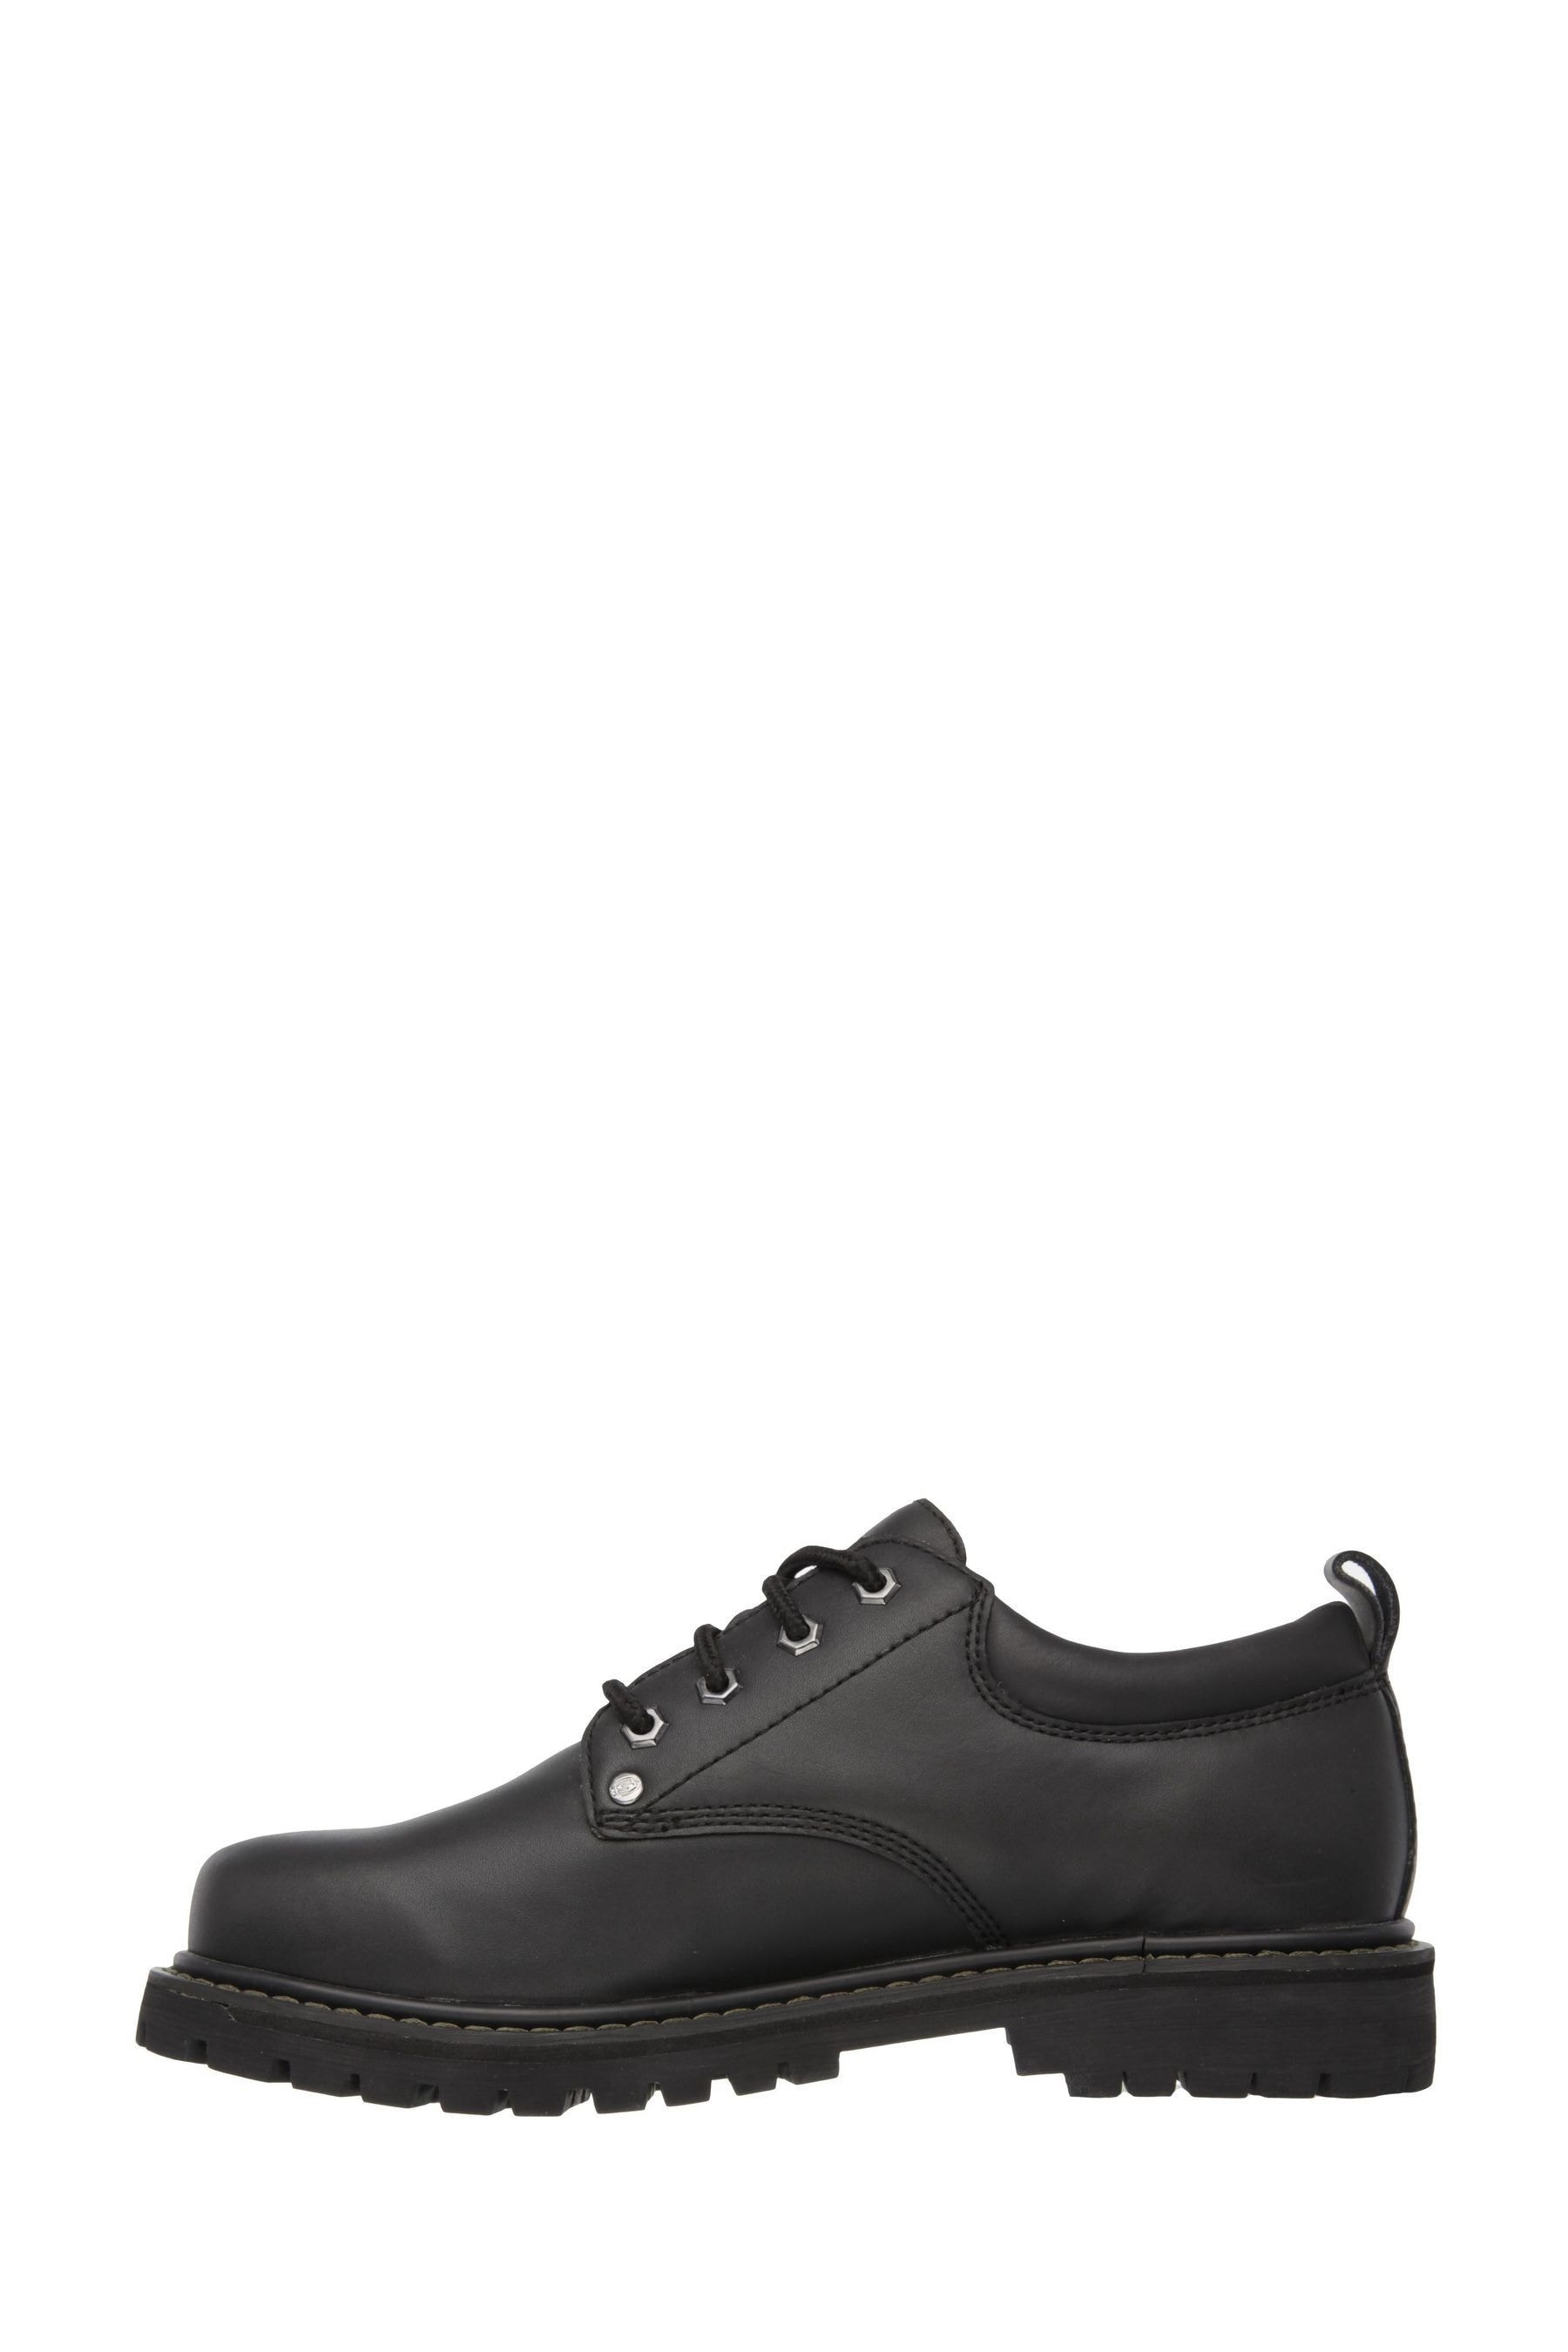 Buy Skechers Black Mens Tom Cats Shoes from the Next UK online shop